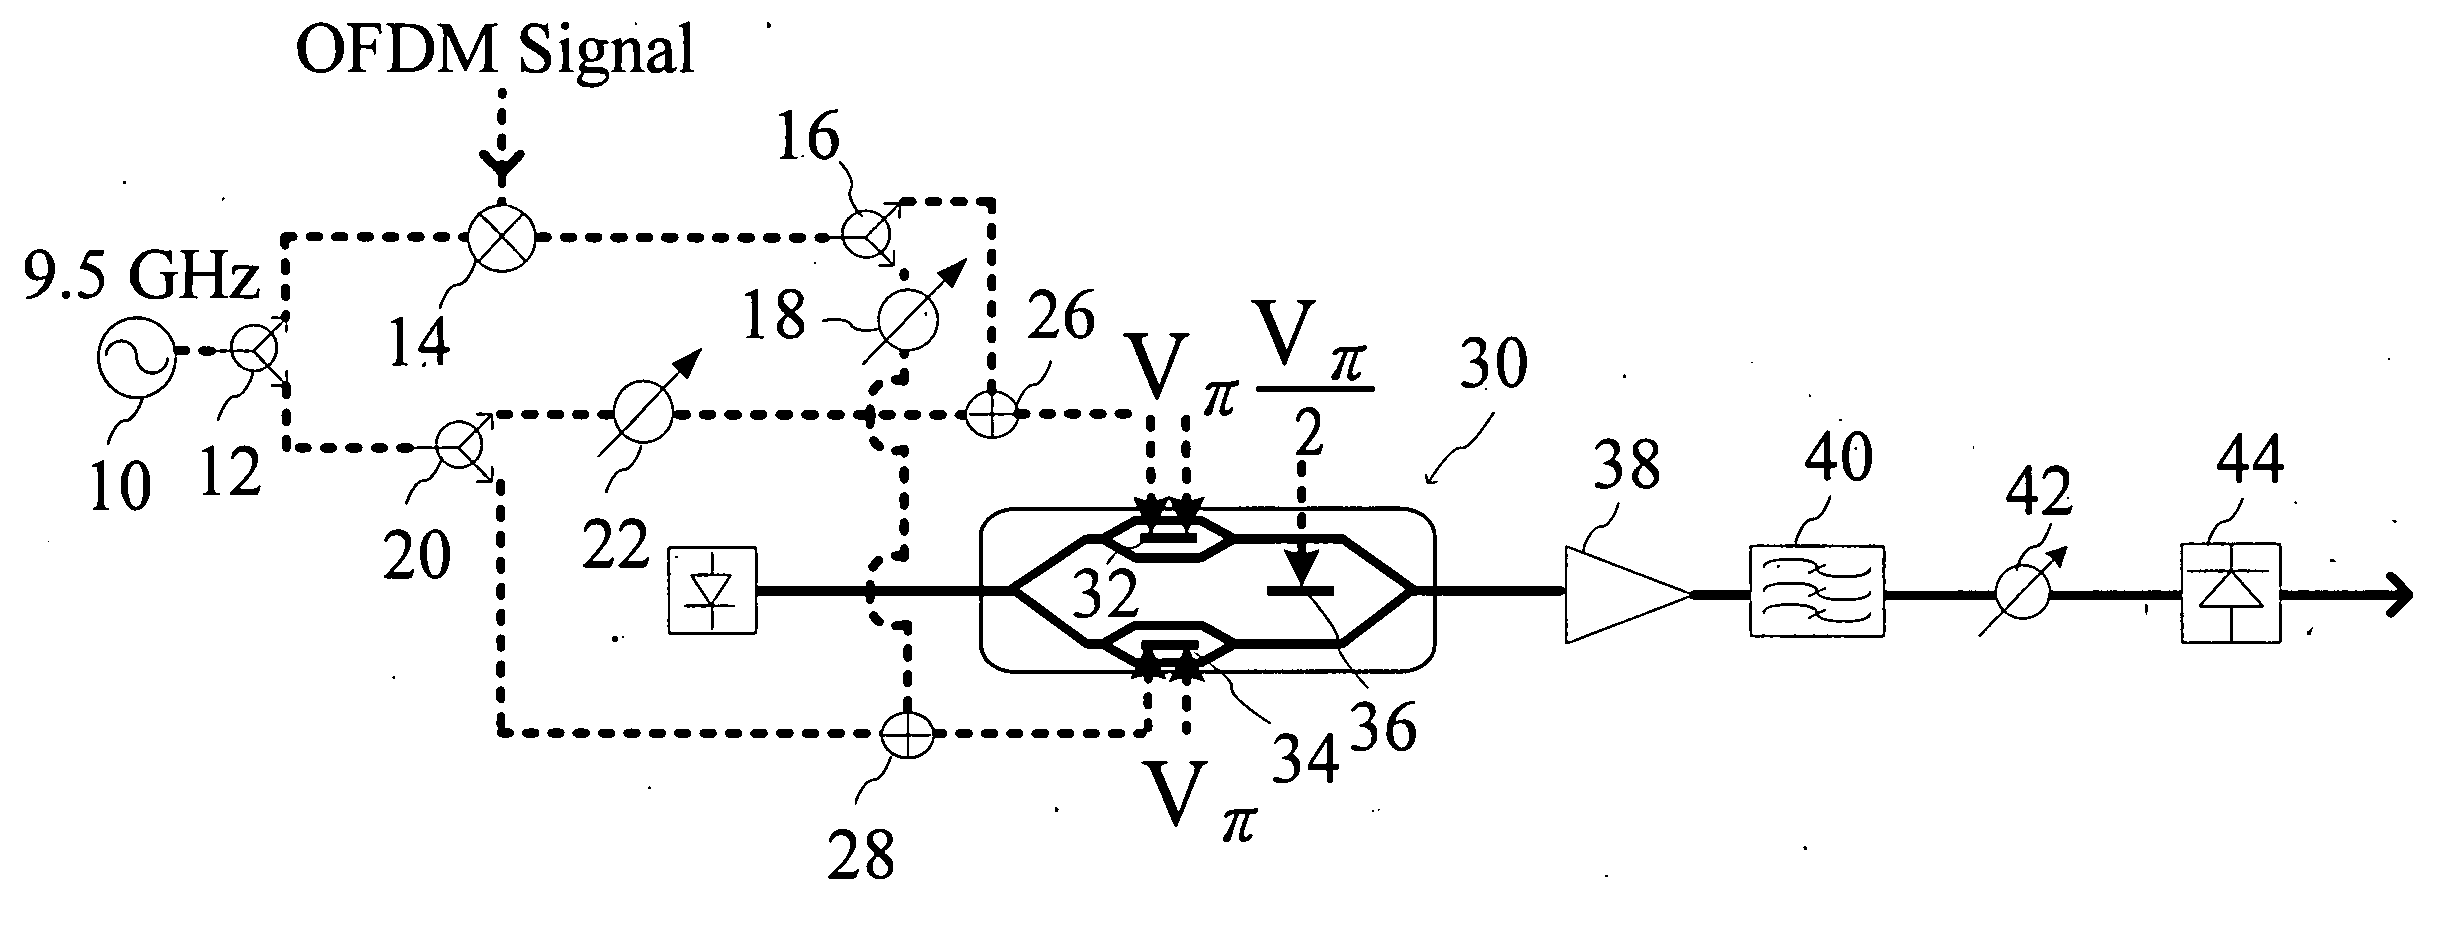 Optical modulating device with frequency multiplying technique for electrical signals